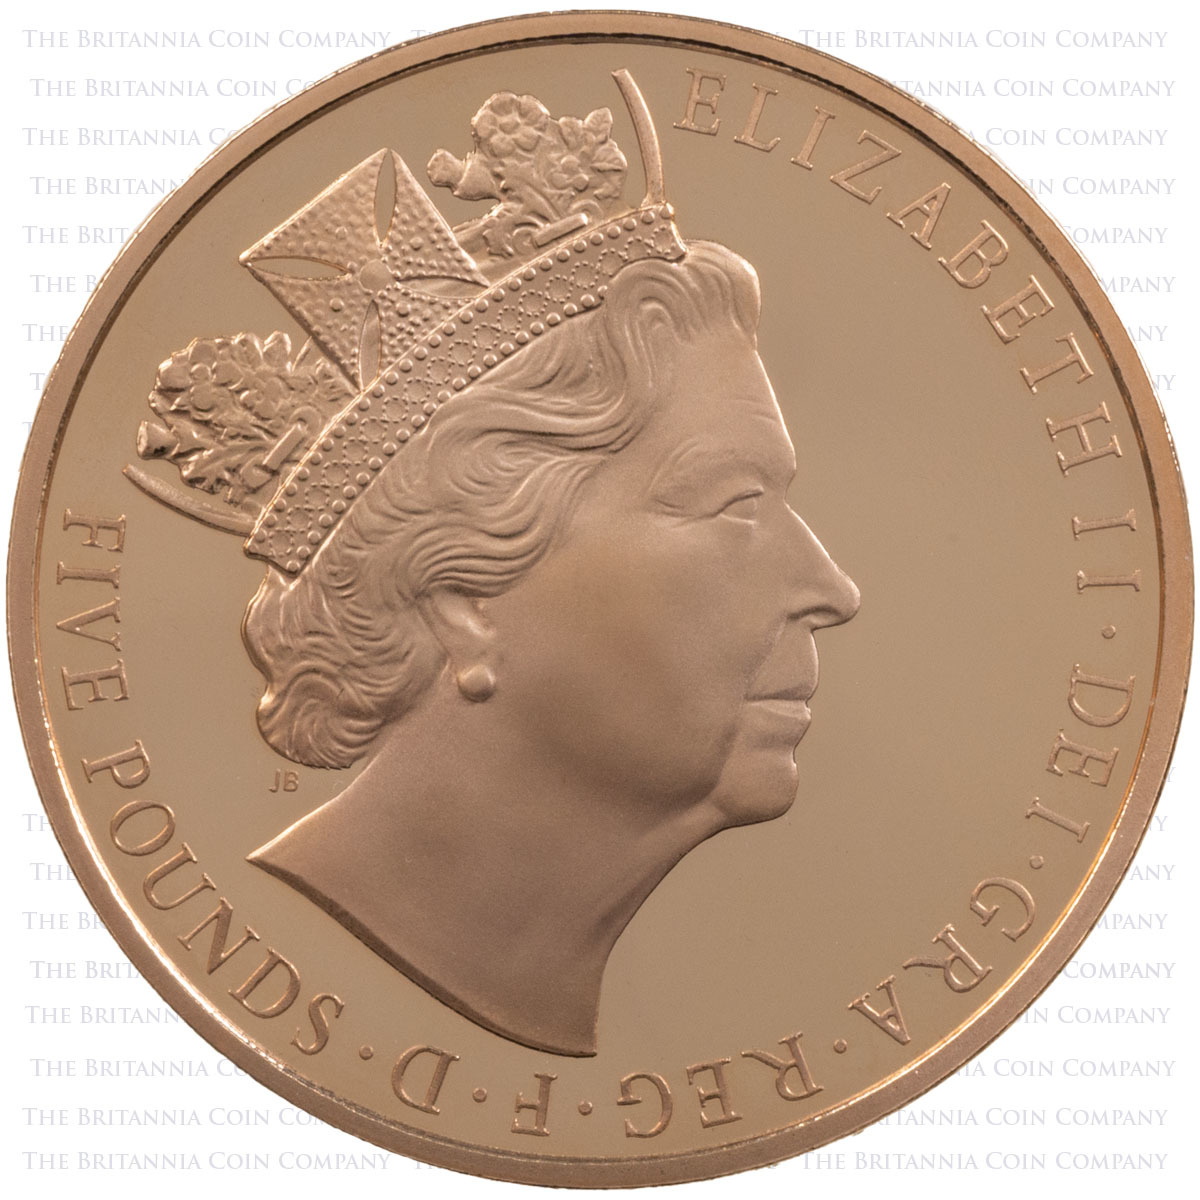 UKLRMGP 2015 Longest Reigning Monarch Five Pound Crown Gold Proof Coin Obverse